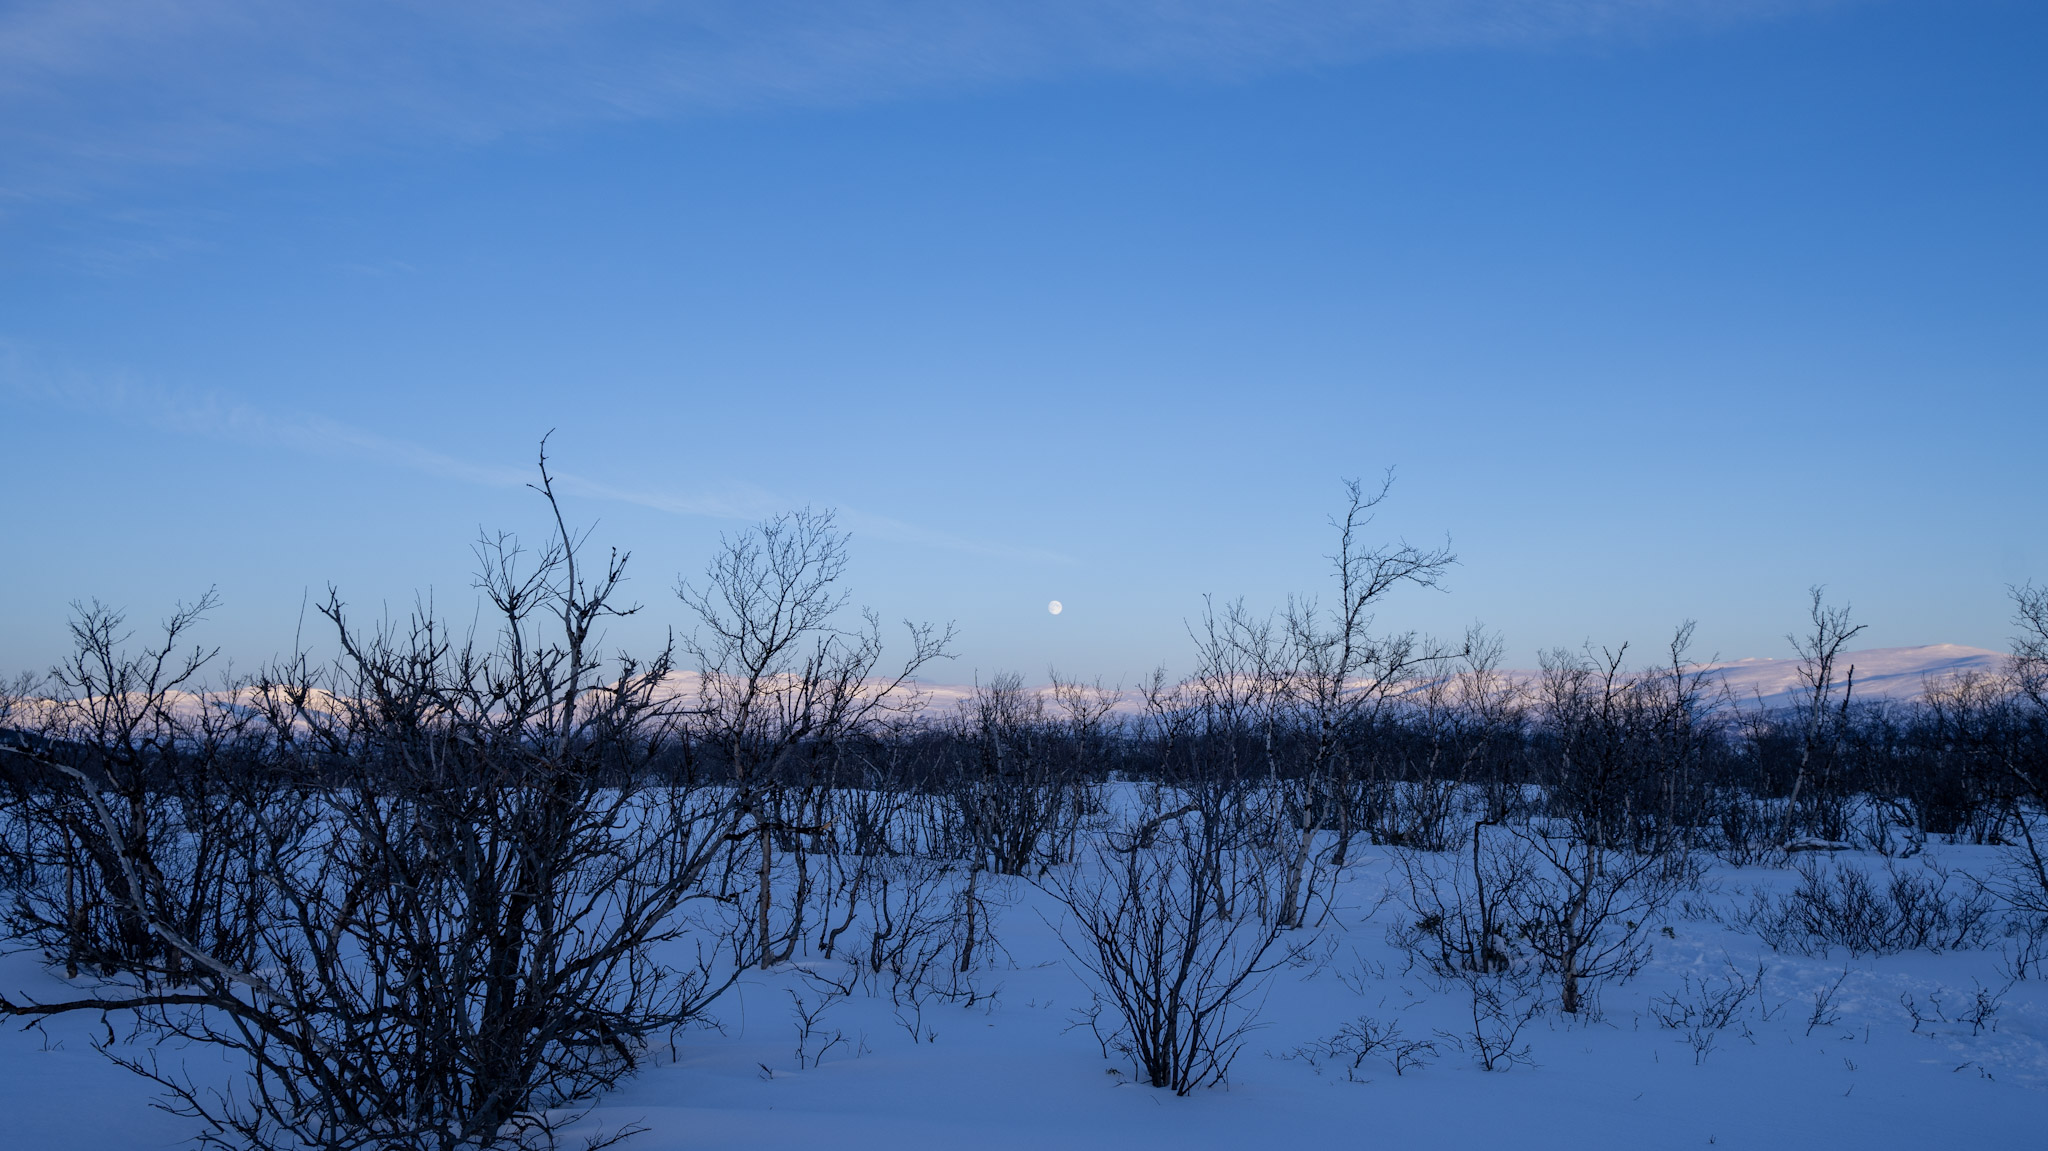 full moon Abisko National Park with small birch trees in the foreground.